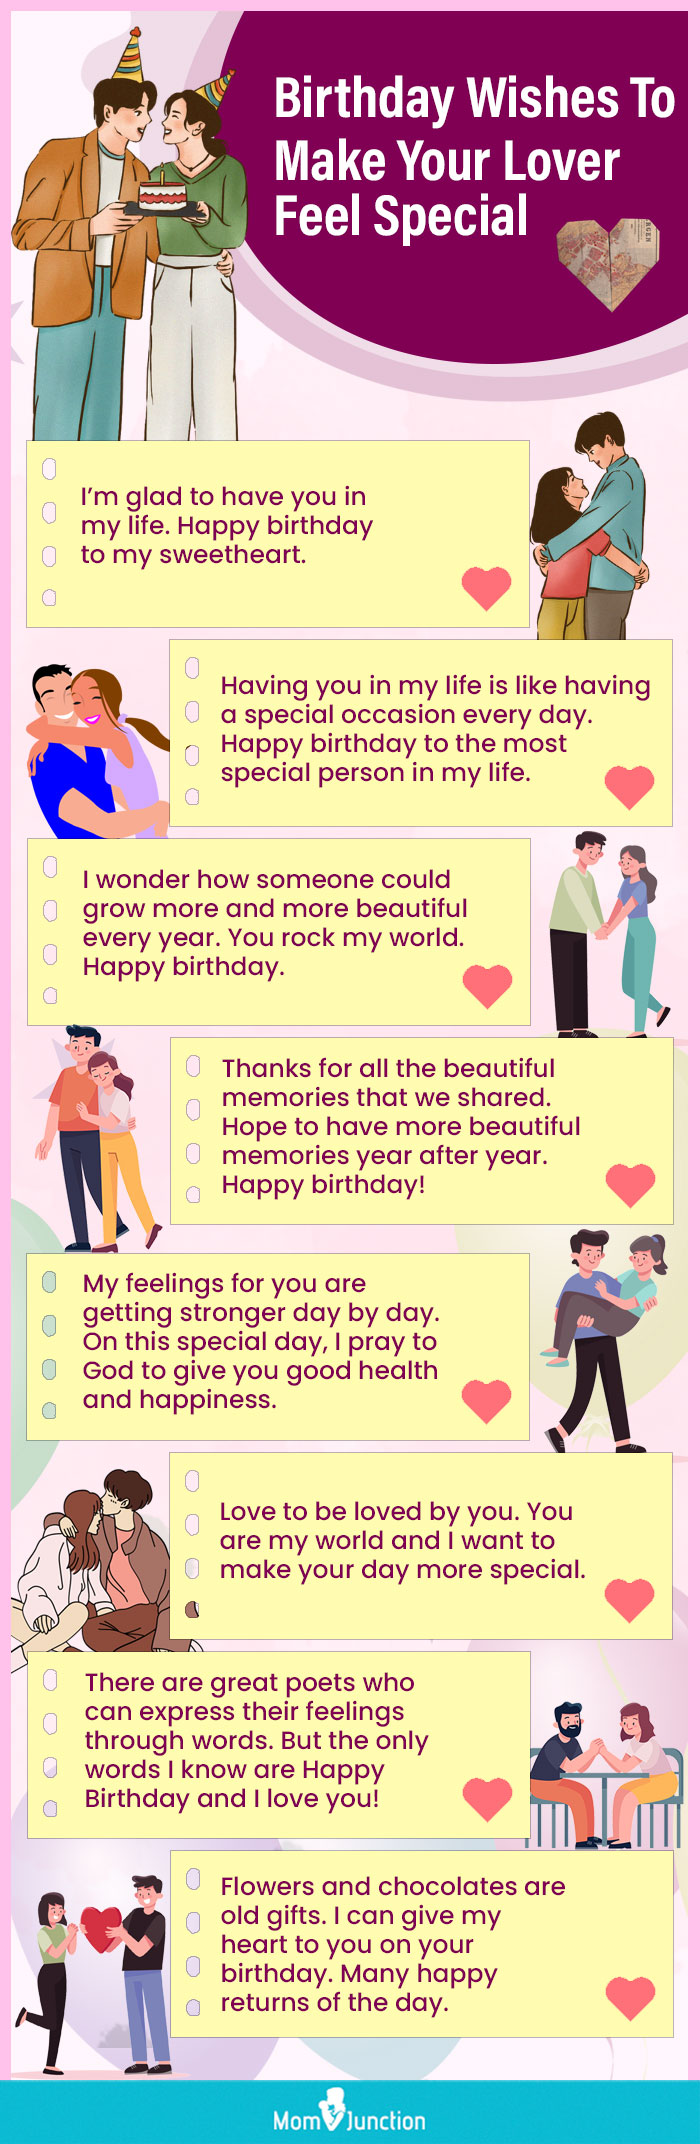 birthday wishes to make your lover feel special(infographic)